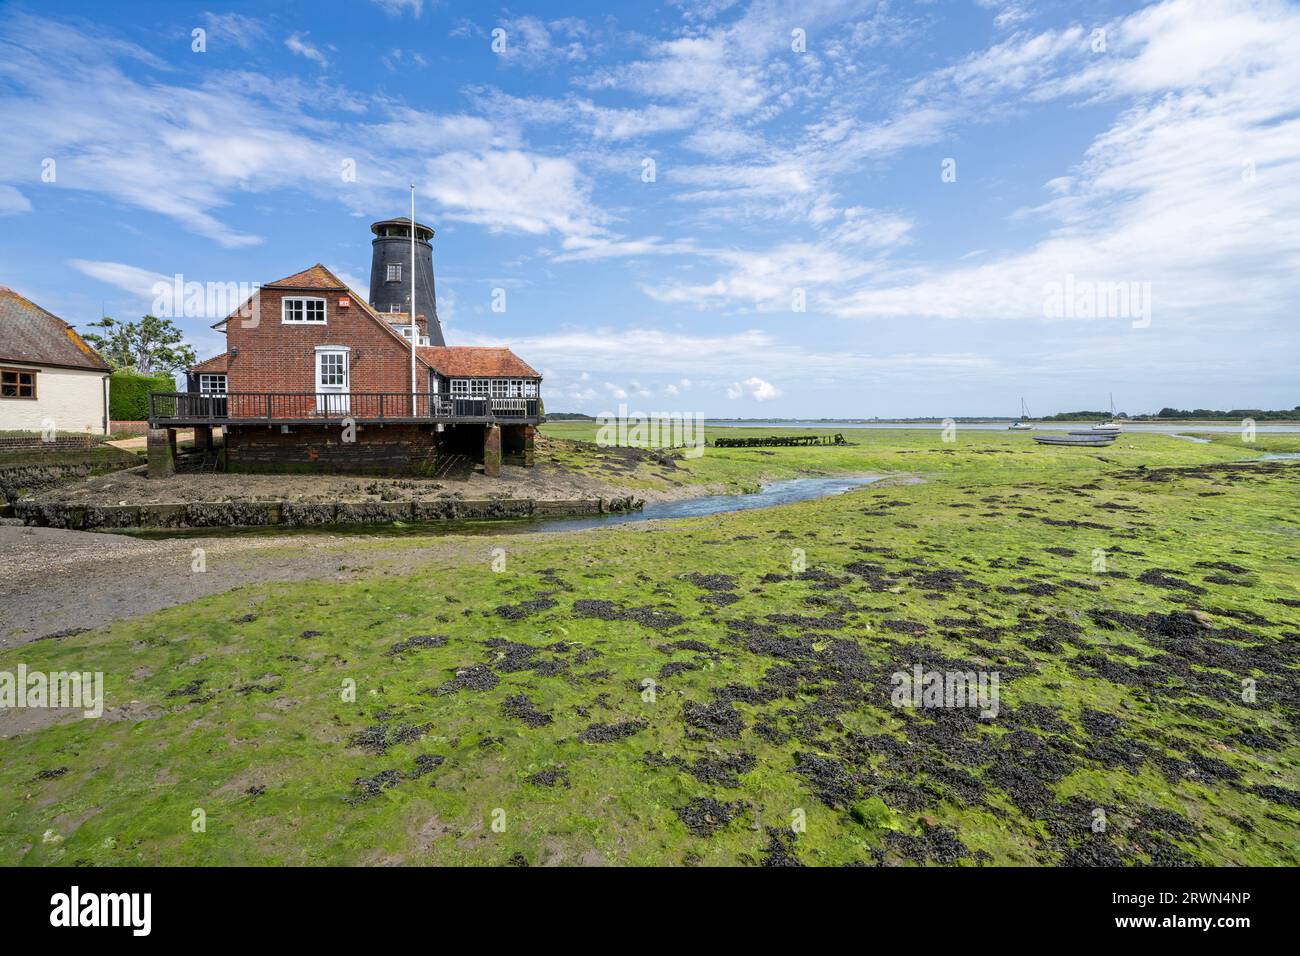 The  Old Mill,  Langstone Quay, Chichester Harbour on the Solent, Hampshire, southern England, UK Stock Photo